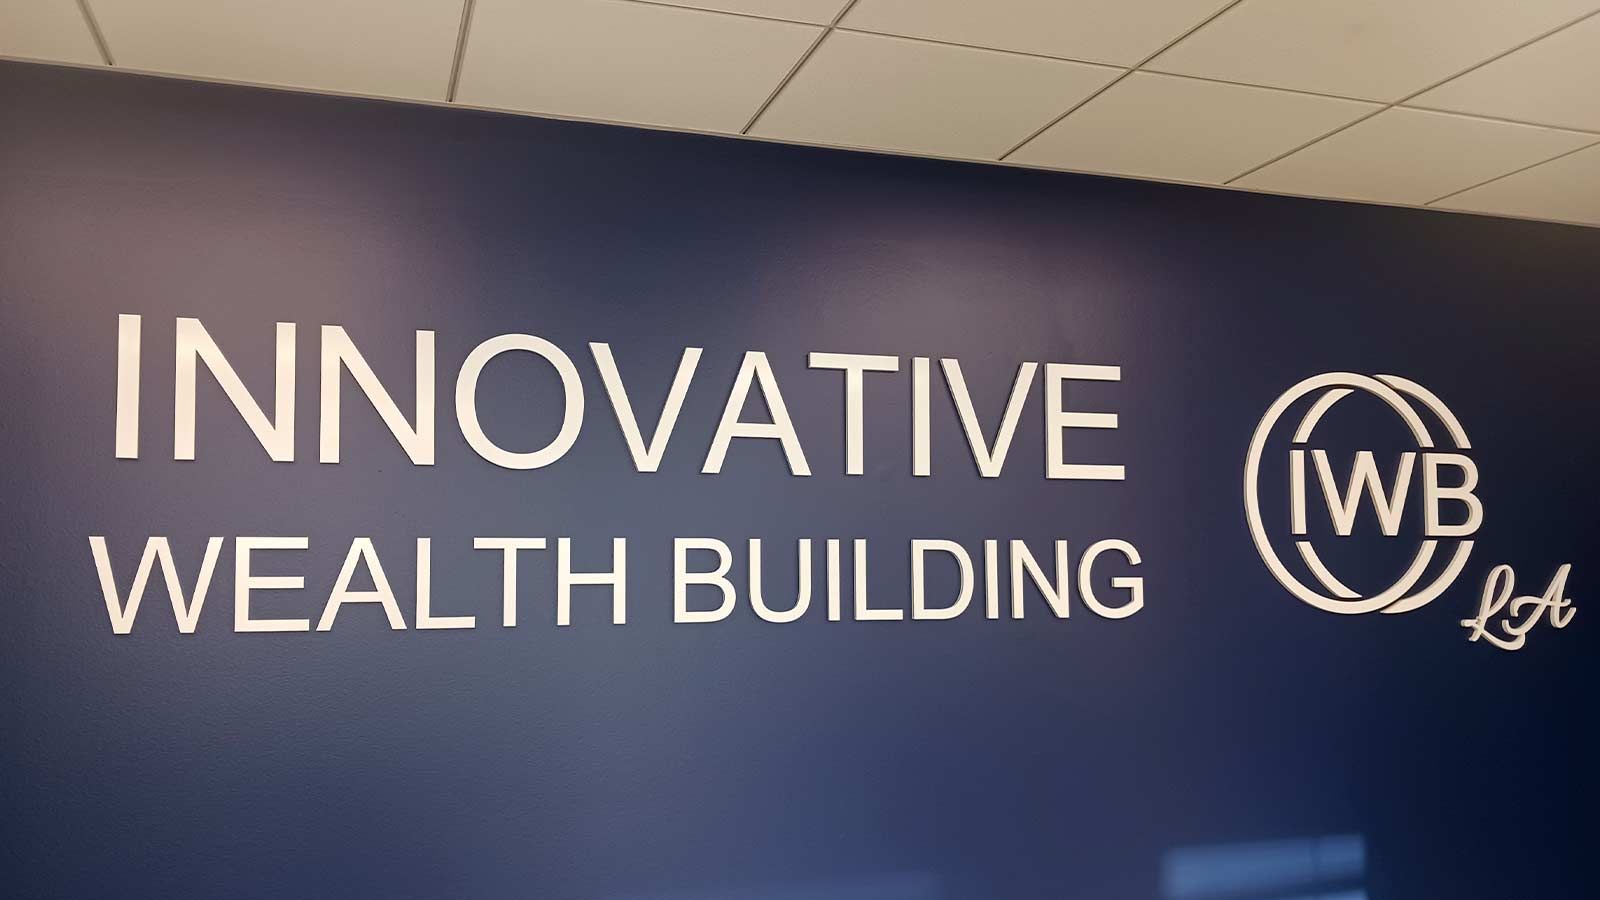 Innovative Wealth Building acrylic signs mounted on the wall